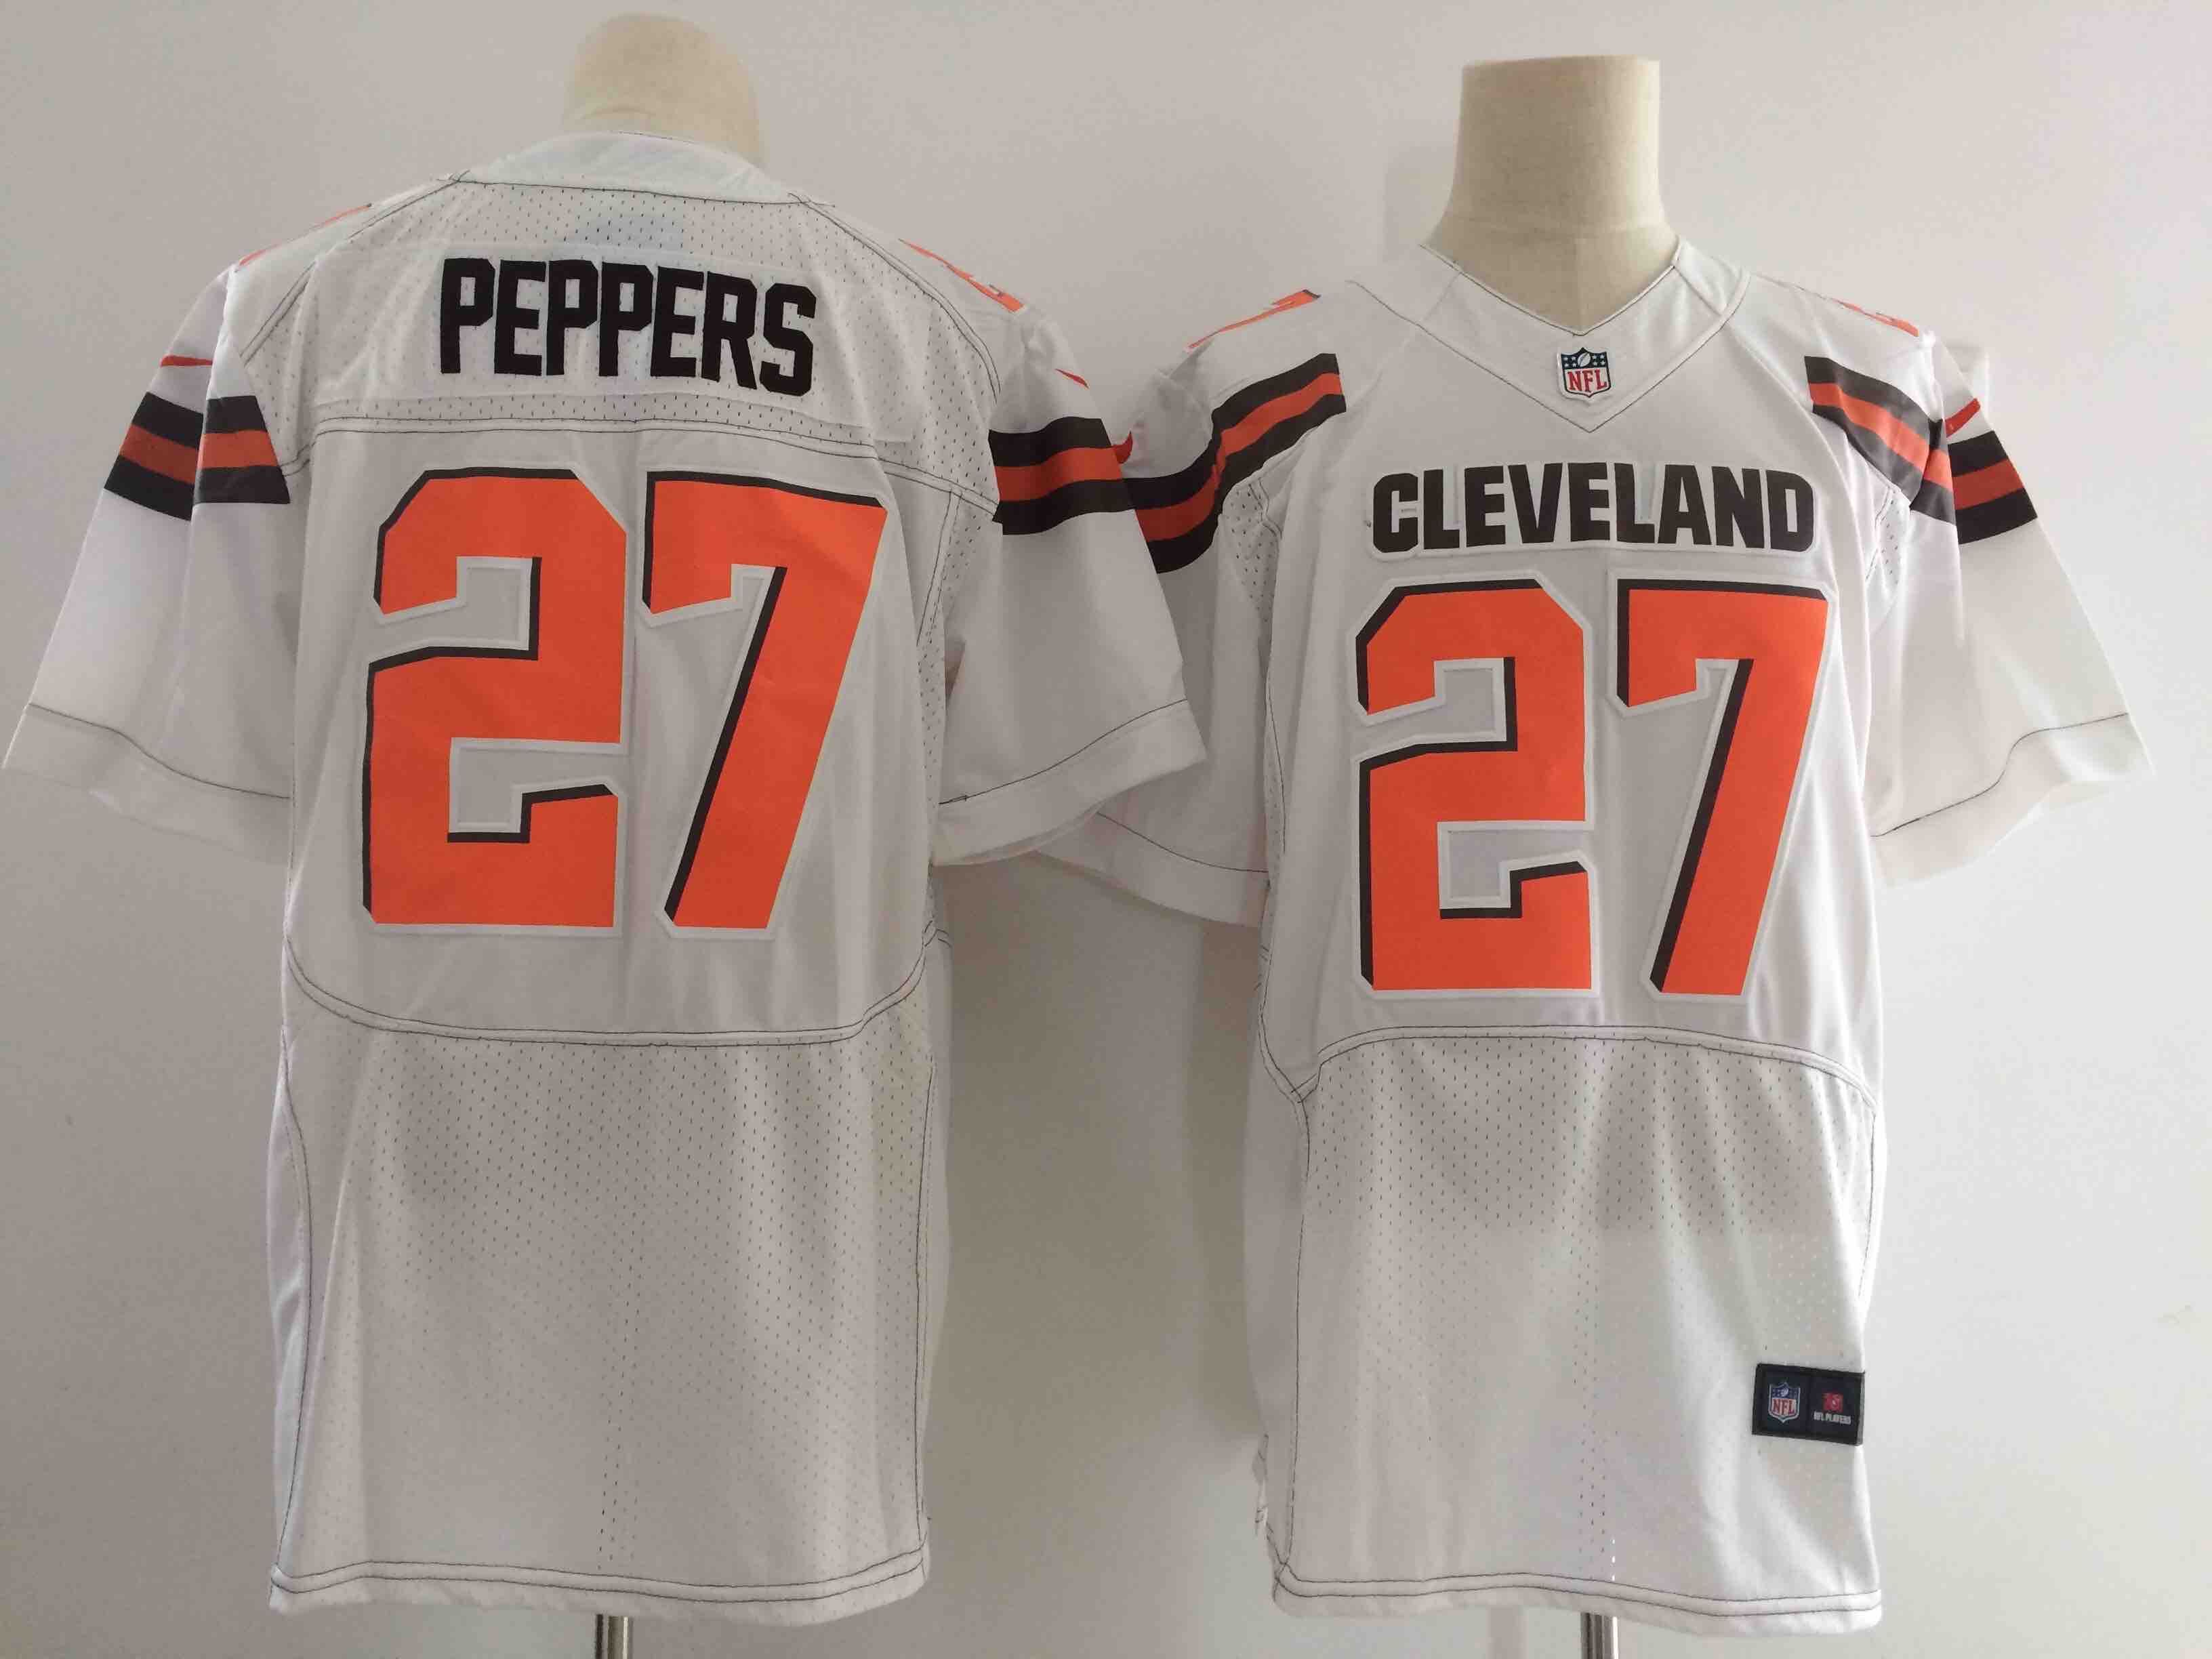 NFL Cleveland Browns #27 Peppers White Elite Jersey  